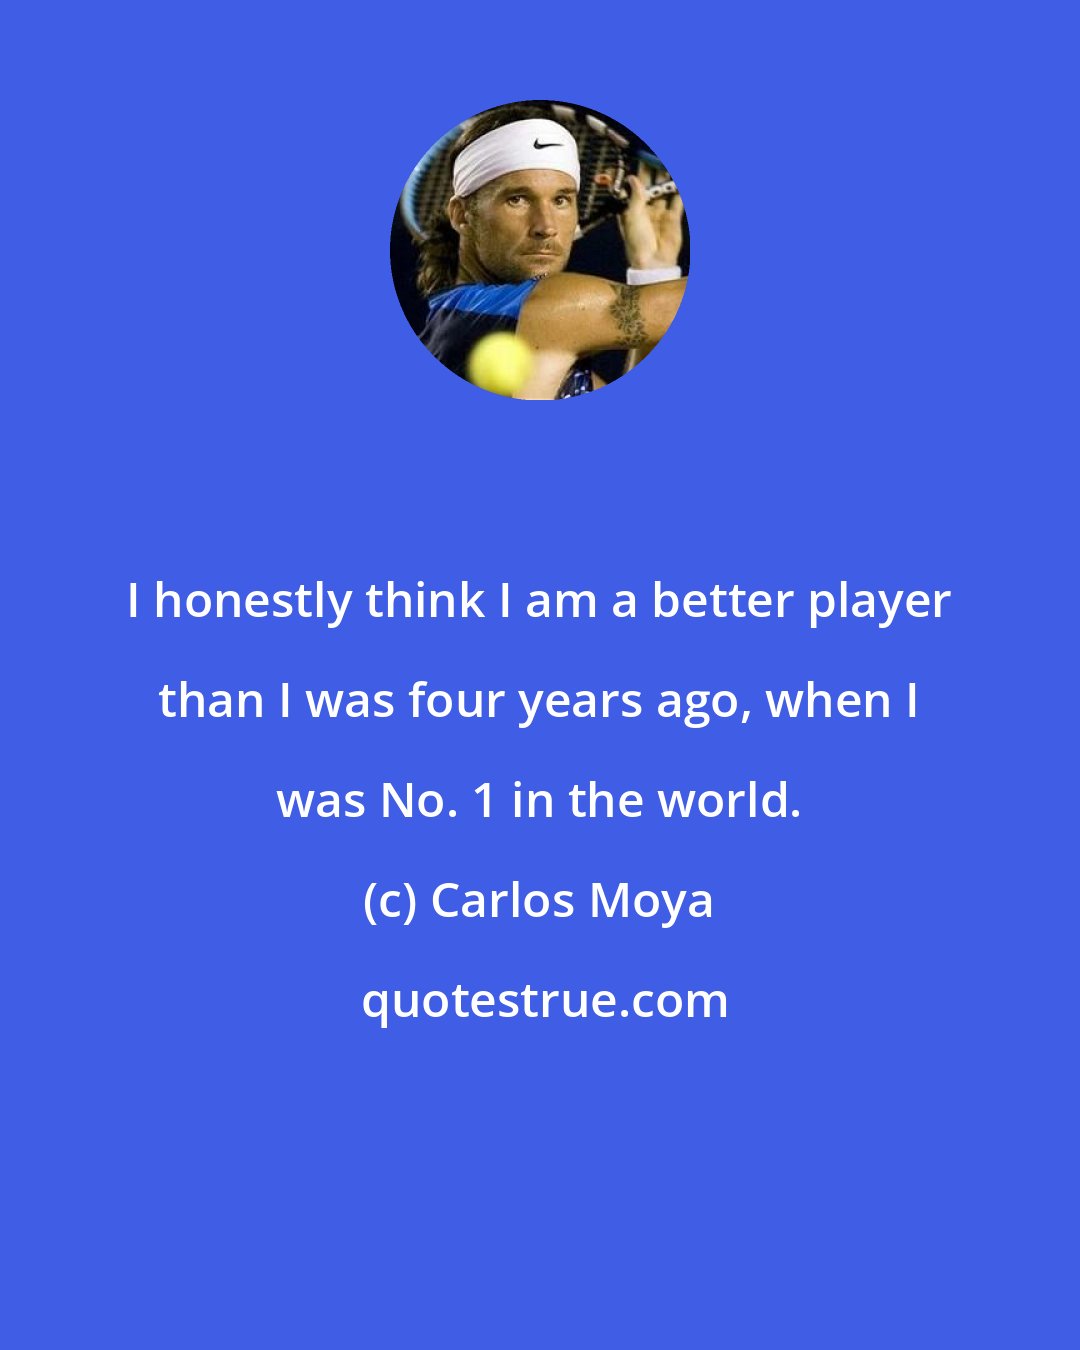 Carlos Moya: I honestly think I am a better player than I was four years ago, when I was No. 1 in the world.